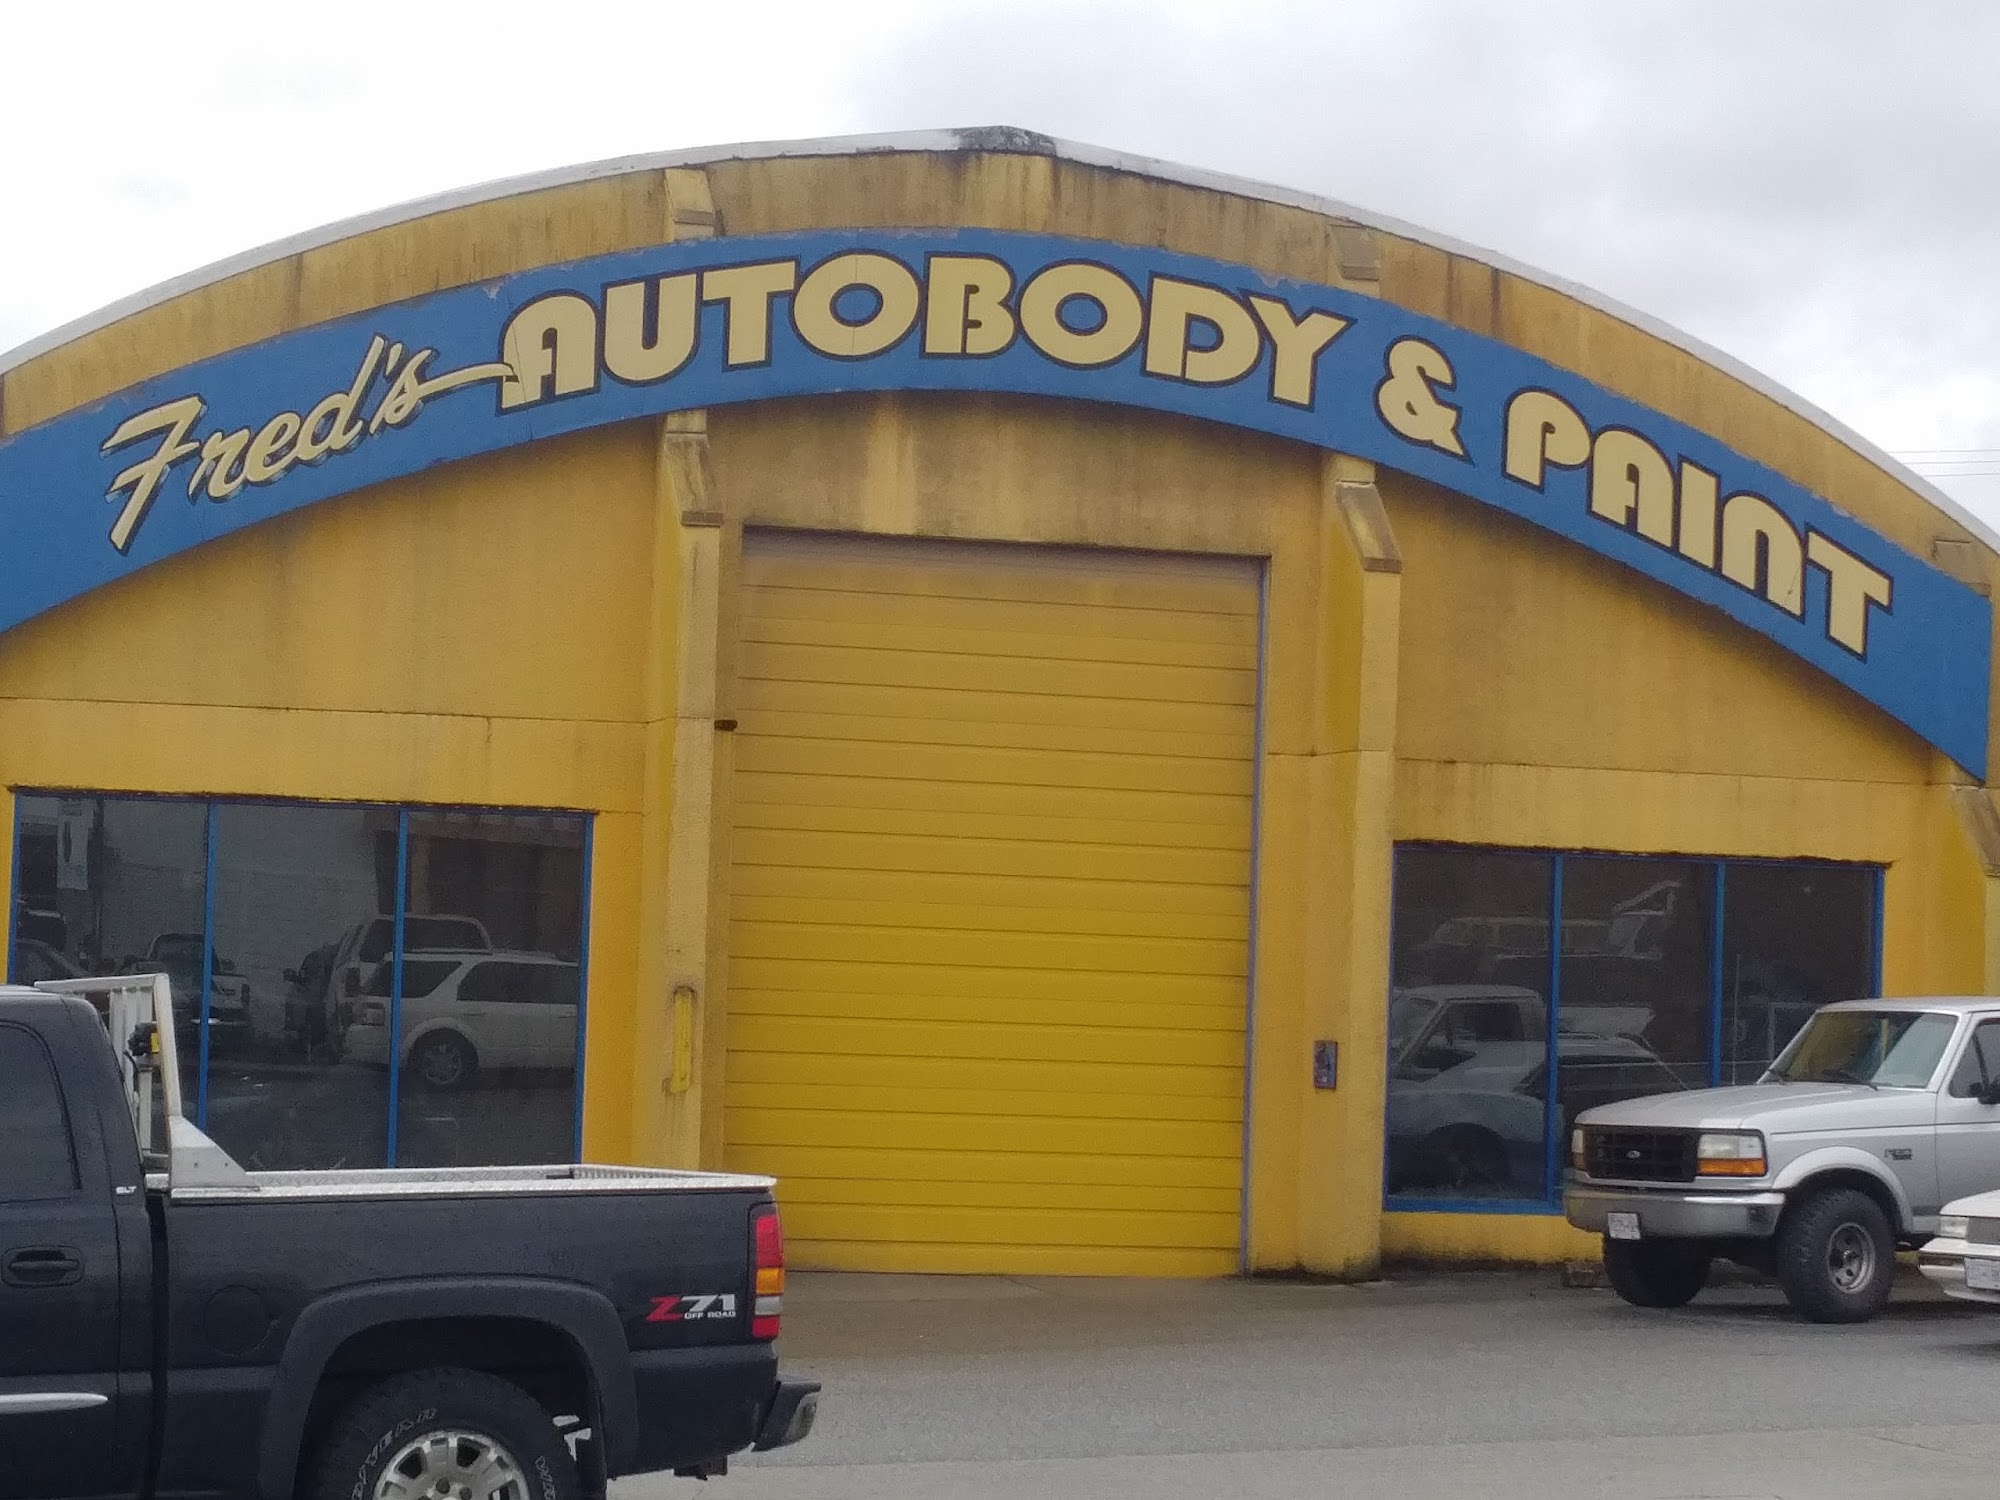 Fred's Autobody & Painting 5623 Wharf Ave, Sechelt British Columbia V0N 3A0